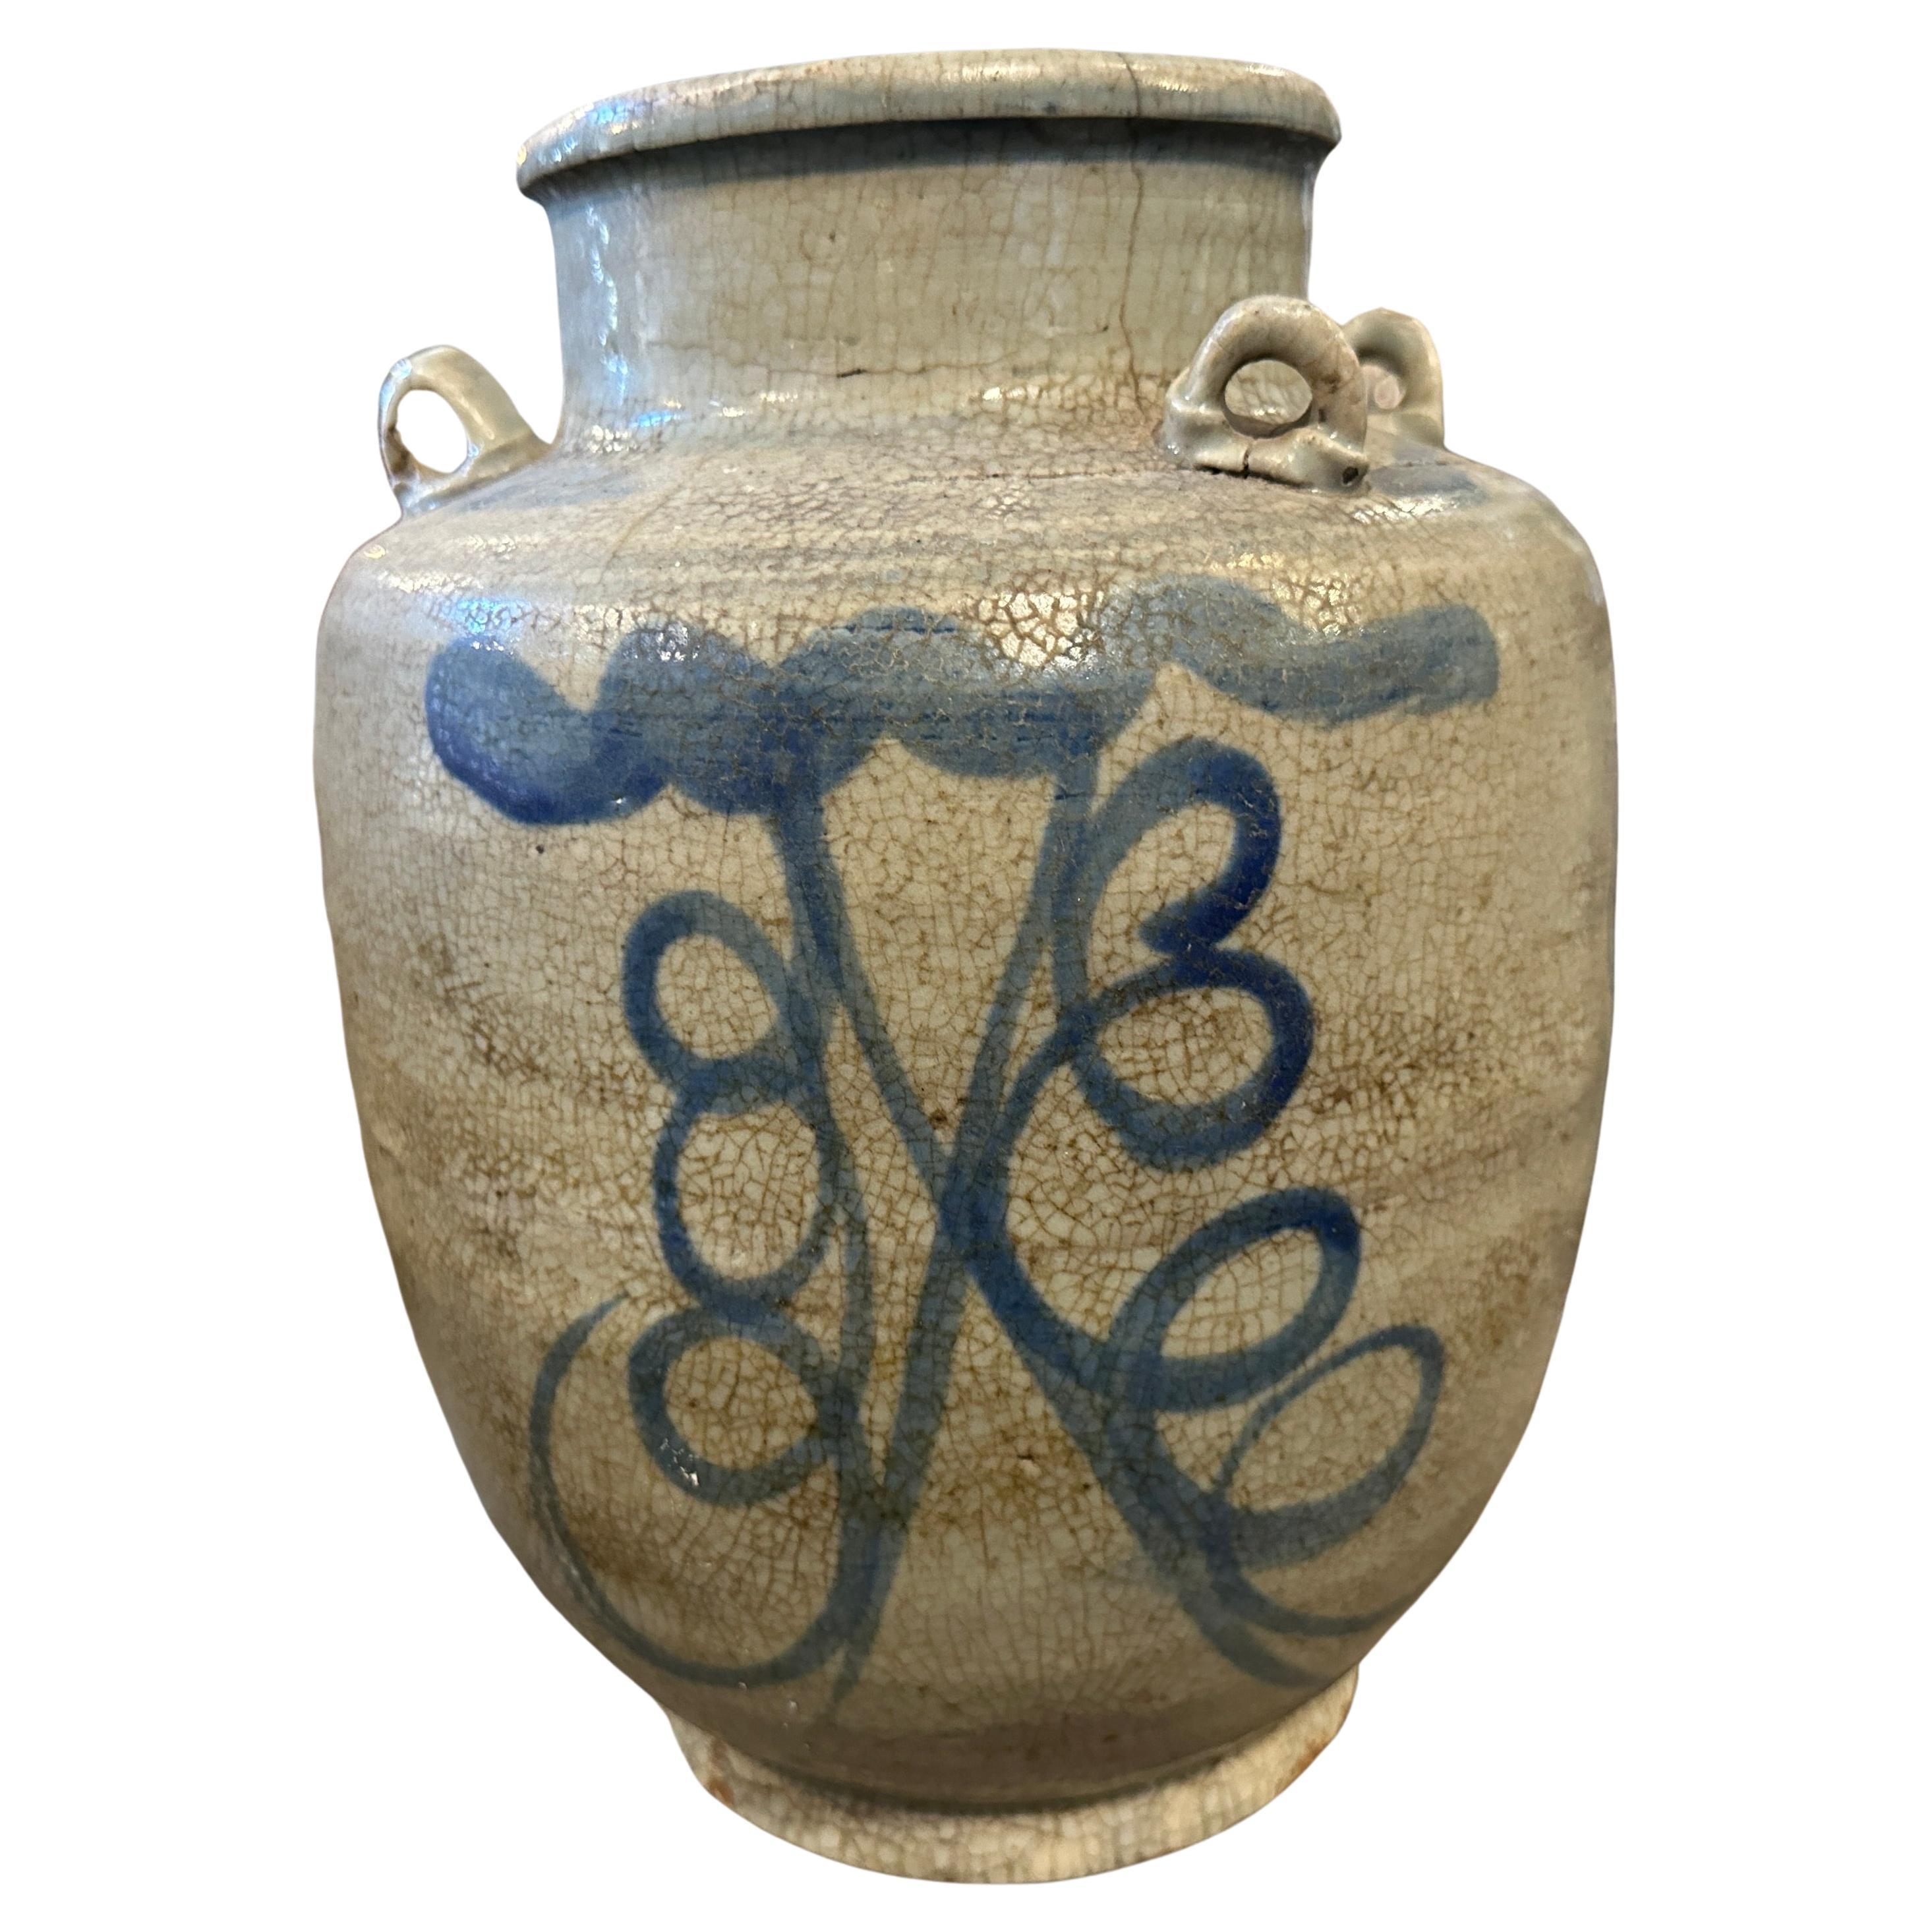 The jug has been manufactured in China in late 19th century, it features intricate hand-painted traditional Chinese motifs designs in shades of blue on a white background. The vase it's in original conditions with signs of use and age. it was mostly